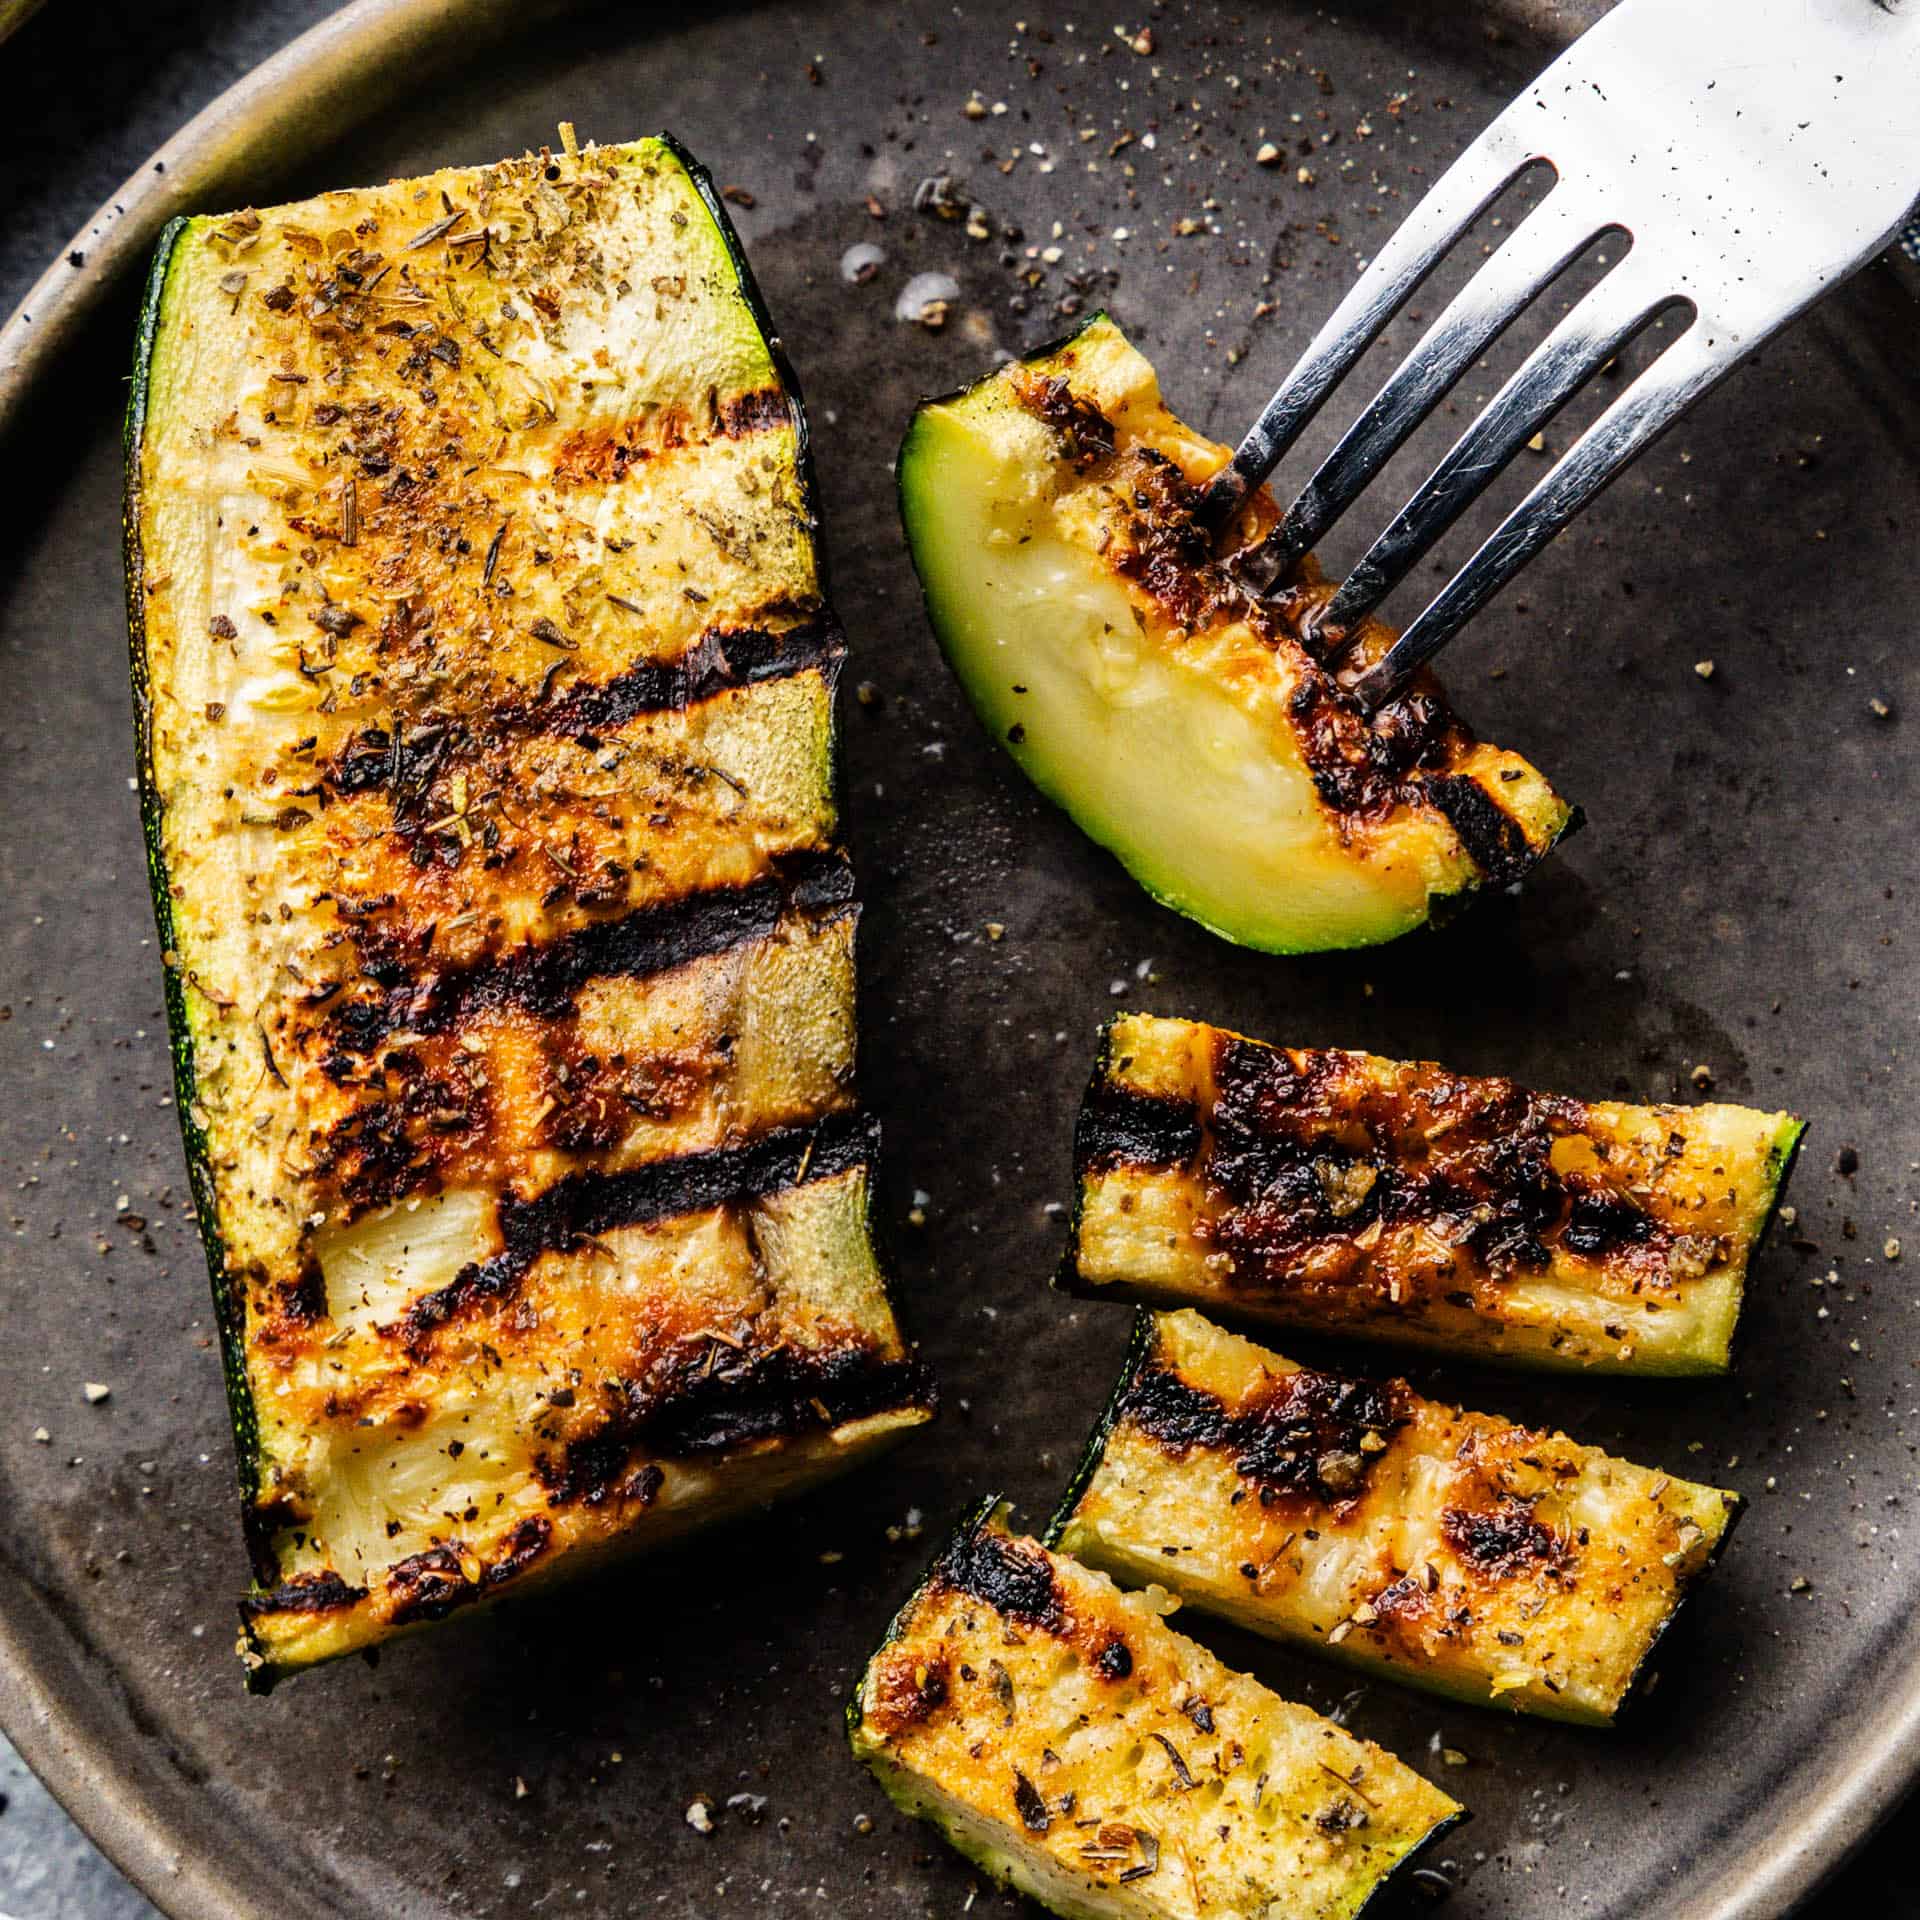 Two slices of grilled zucchini on a plate with a fork.